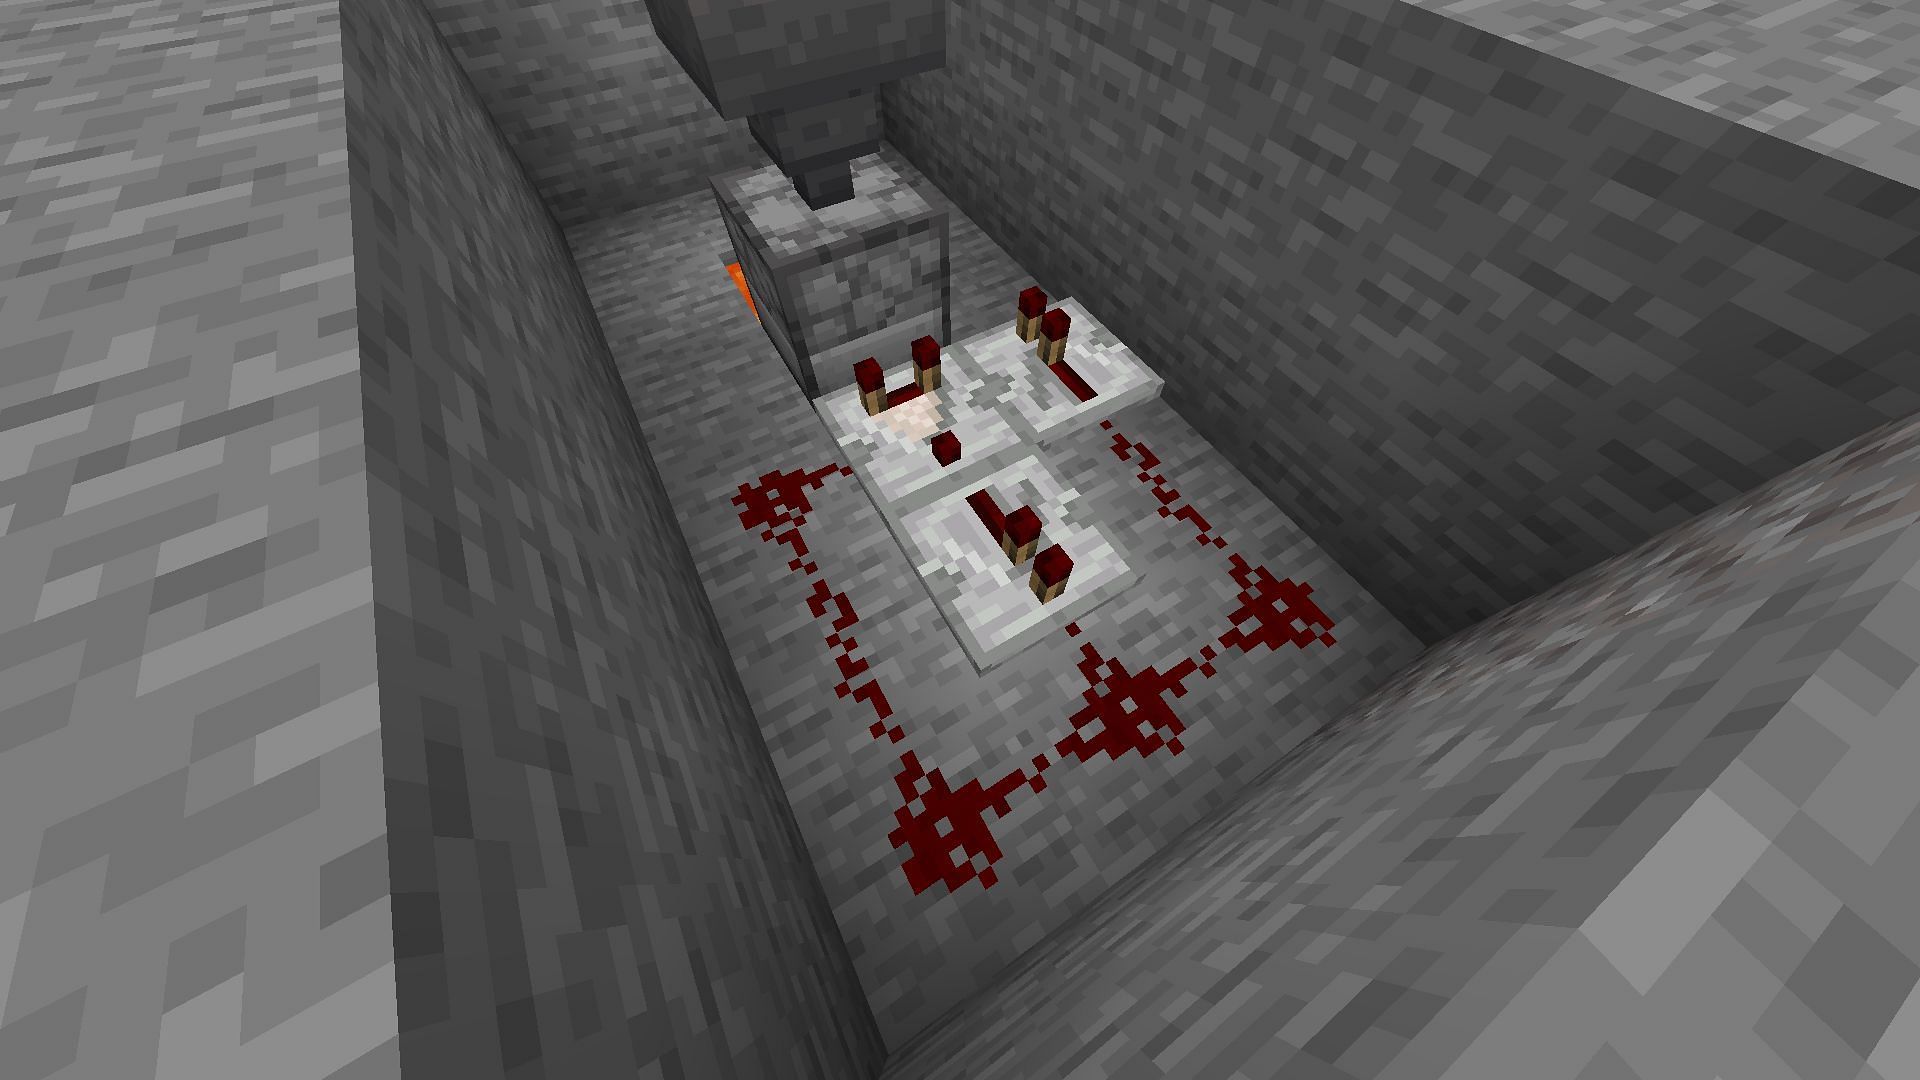 Redstone contraption can be quite fun once Minecraft players get the hang of it (Image via Mojang) 